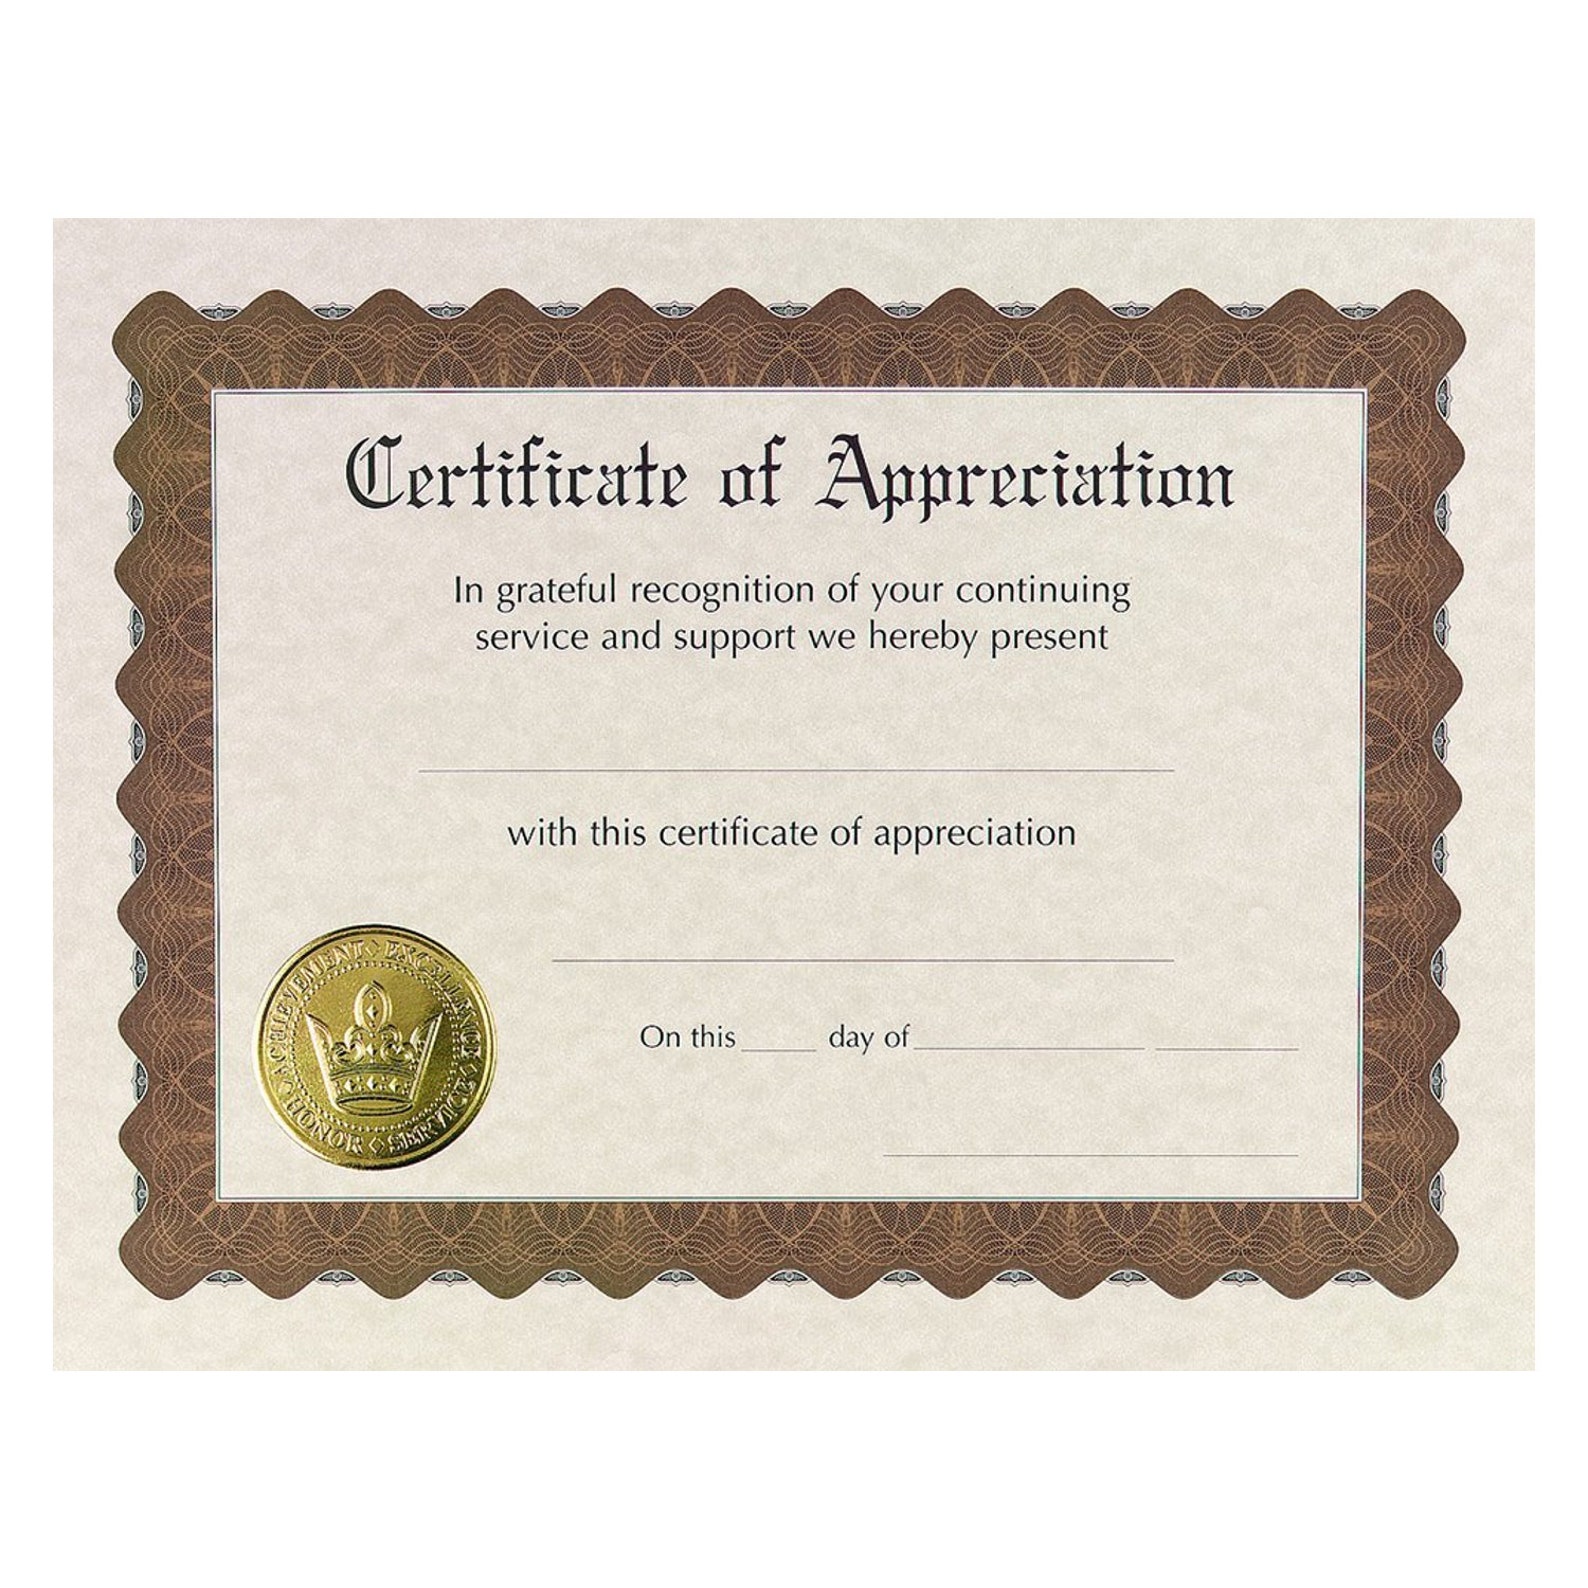 certificate-of-appreciation-with-fill-in-the-blank-lines-8-etsy